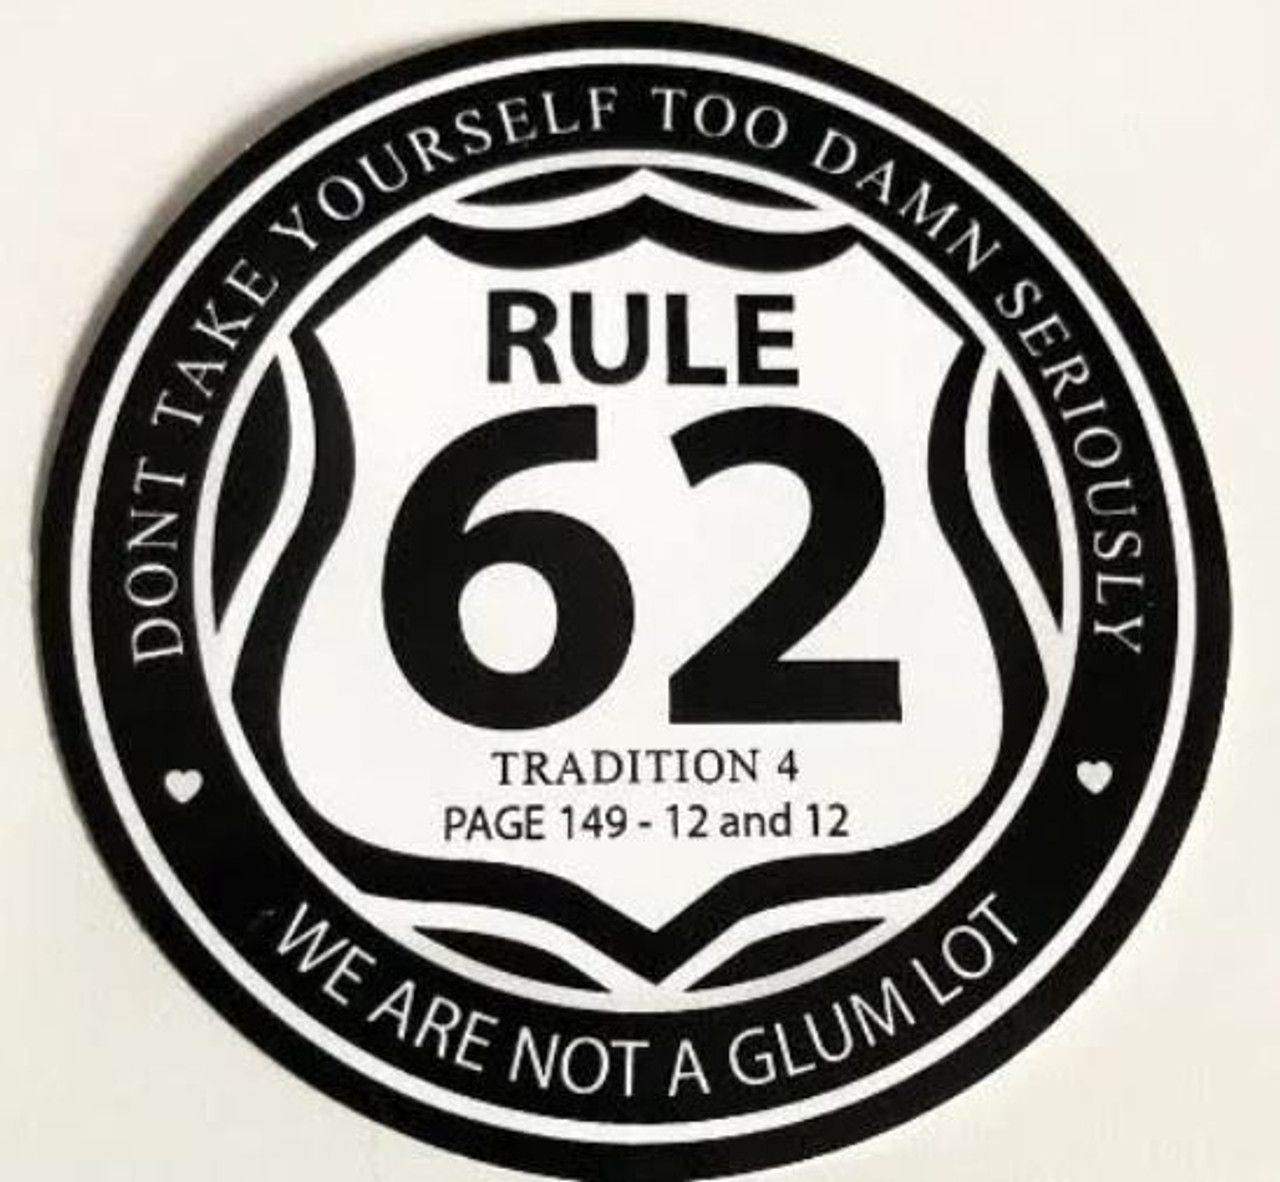 Buy Rule 62 We Are Not A Glum Lot Sticker Online -Doing It Sober